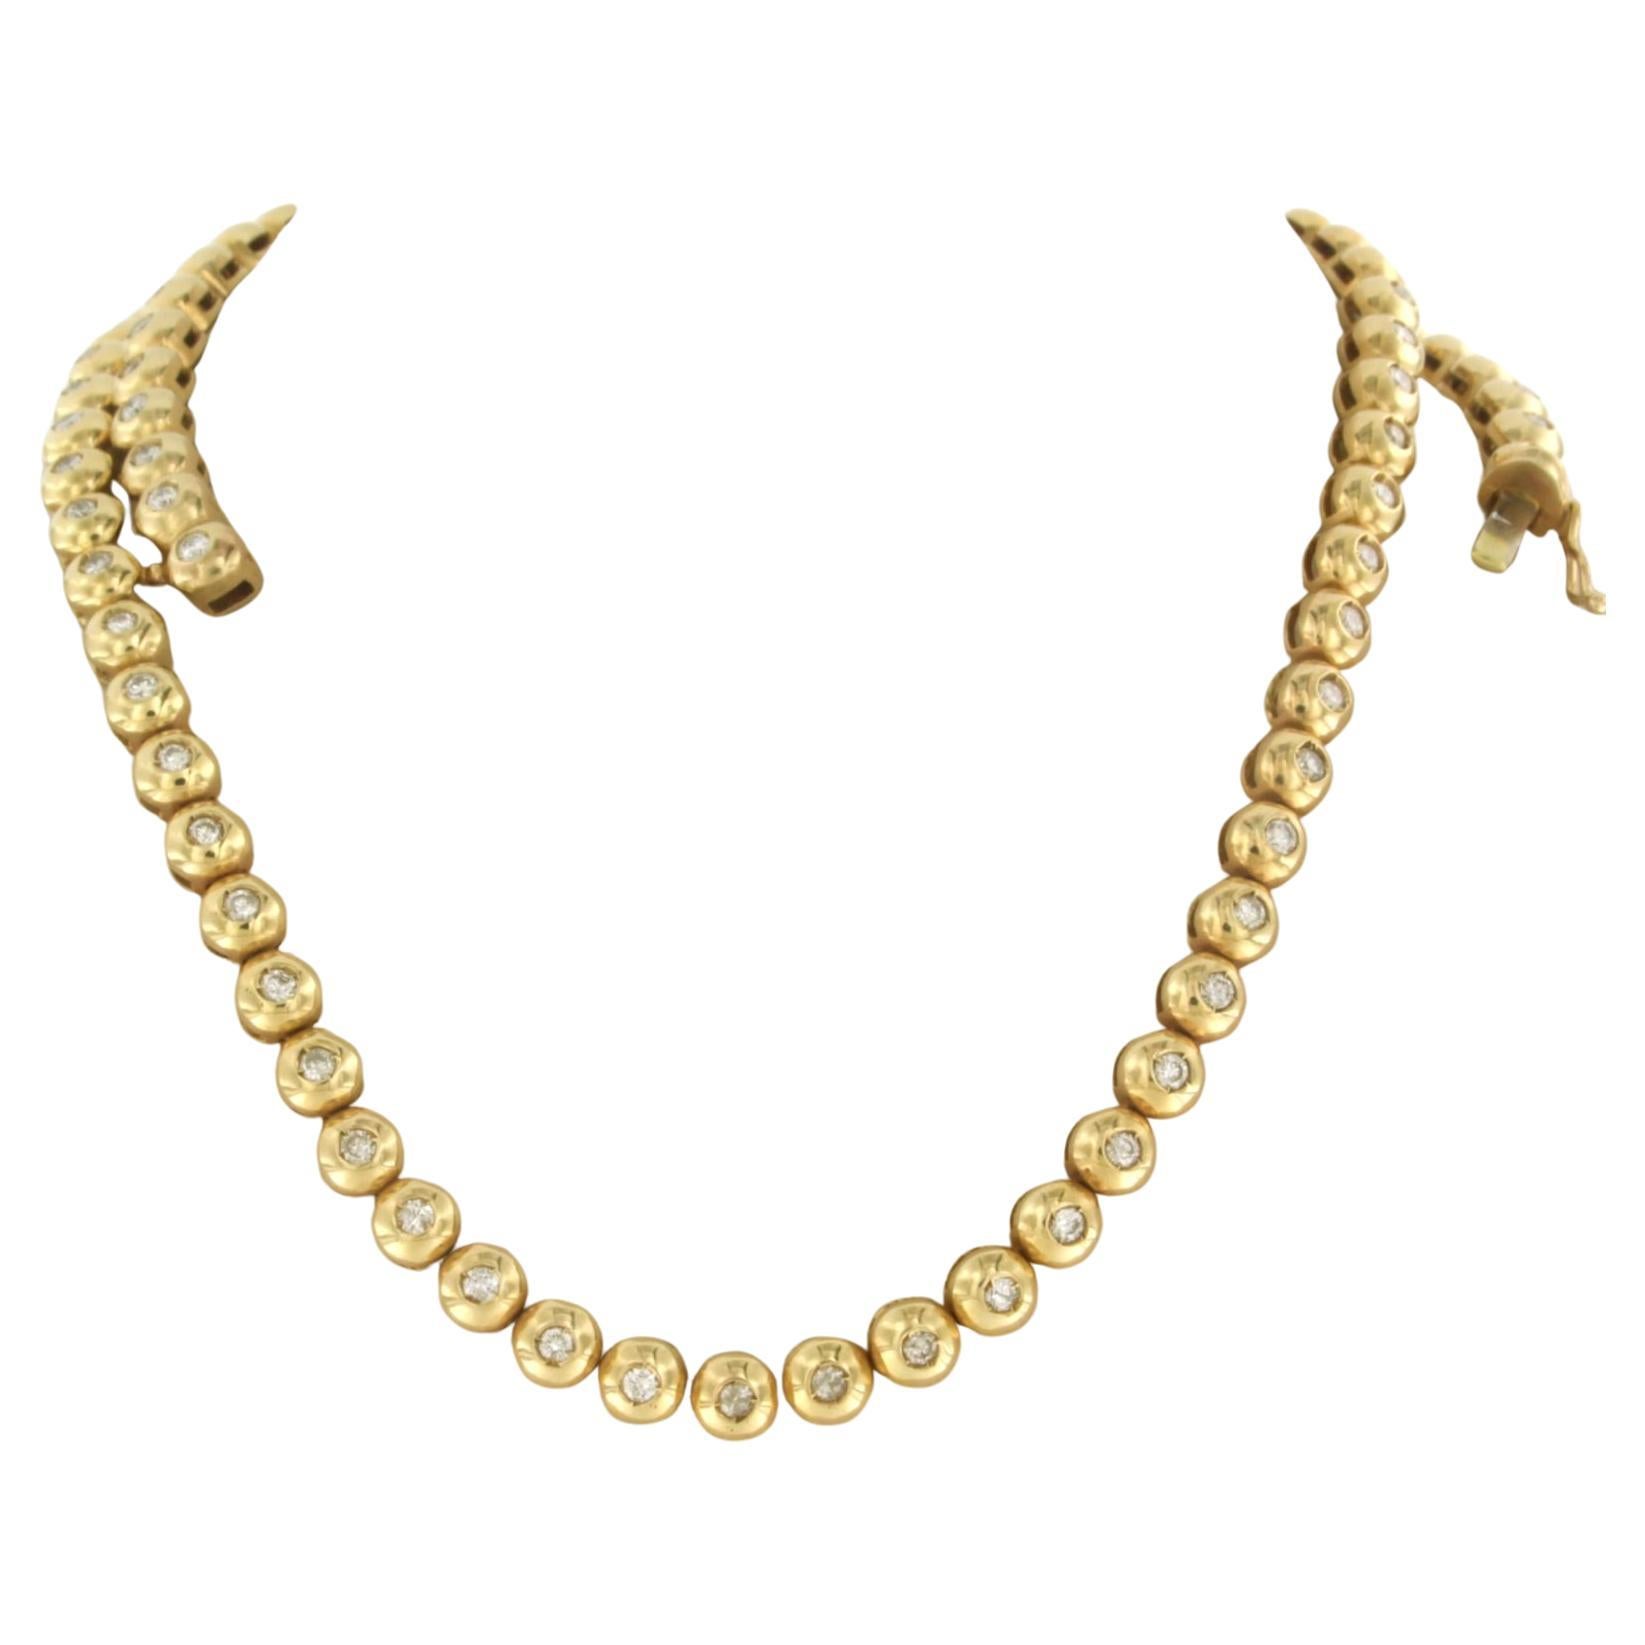 Tennis necklace set with diamonds up to 3.00ct 14k yellow gold